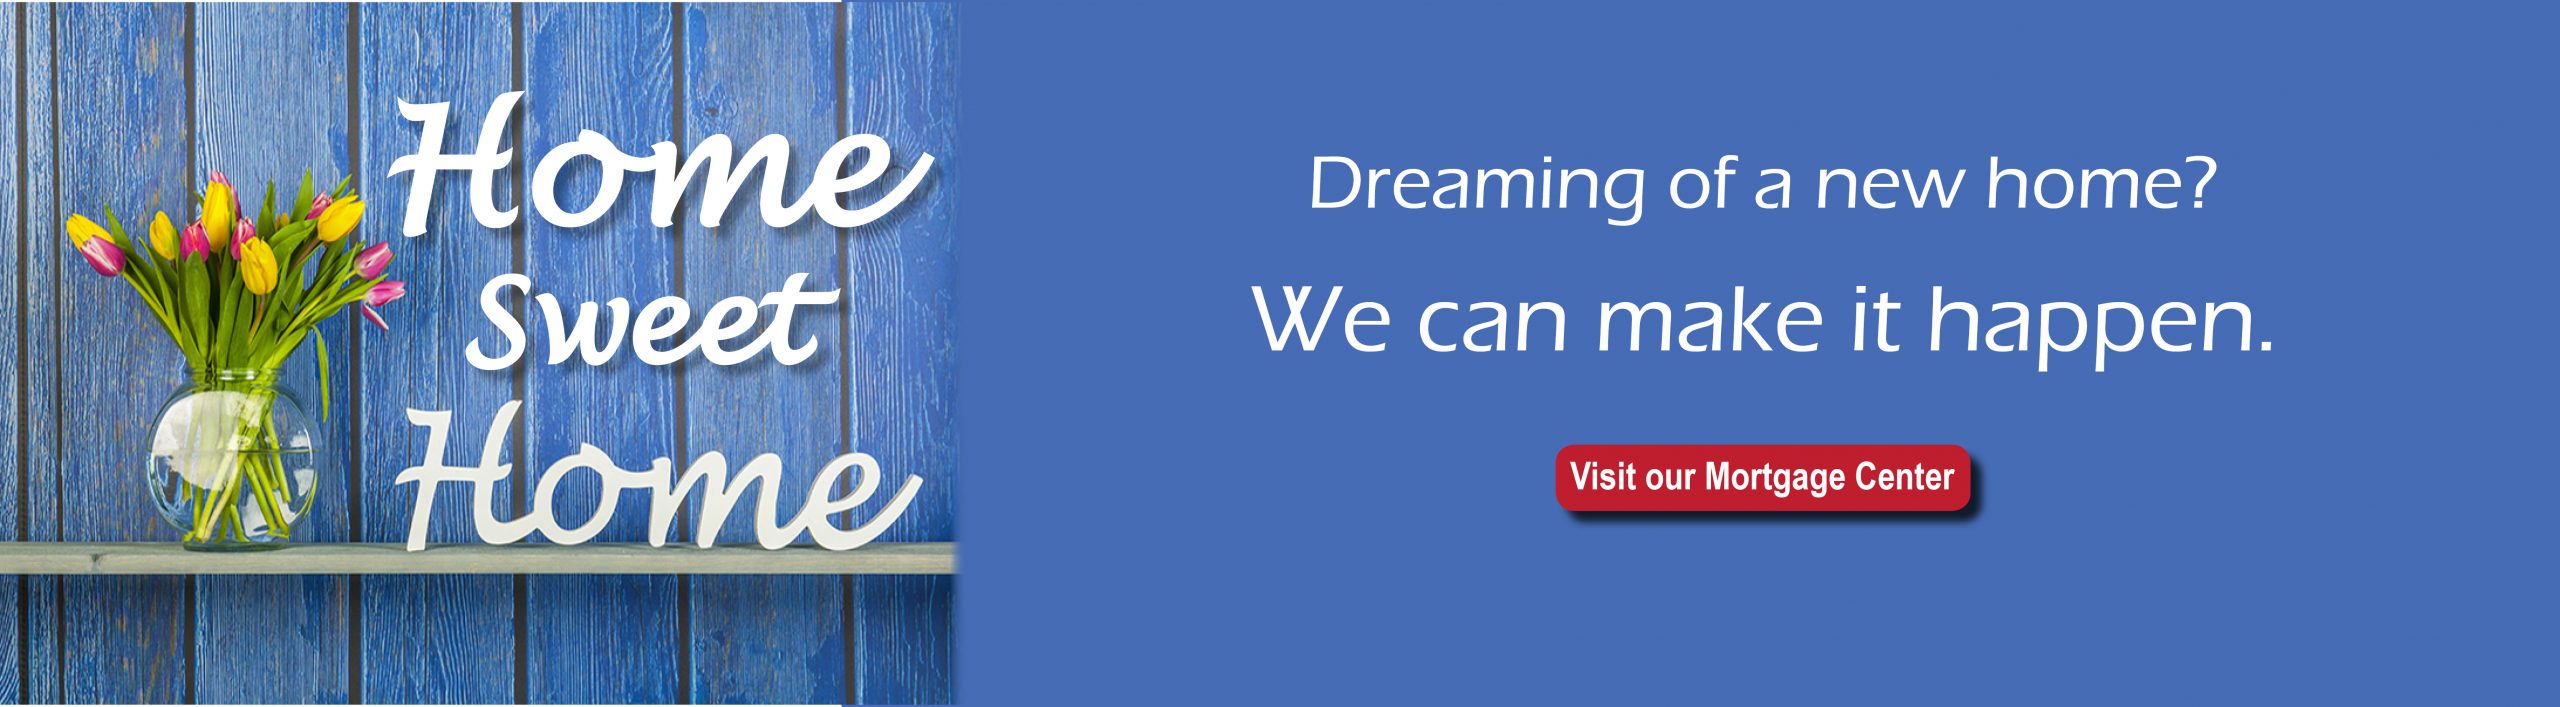 Dreaming of a new home? We can make it happen.